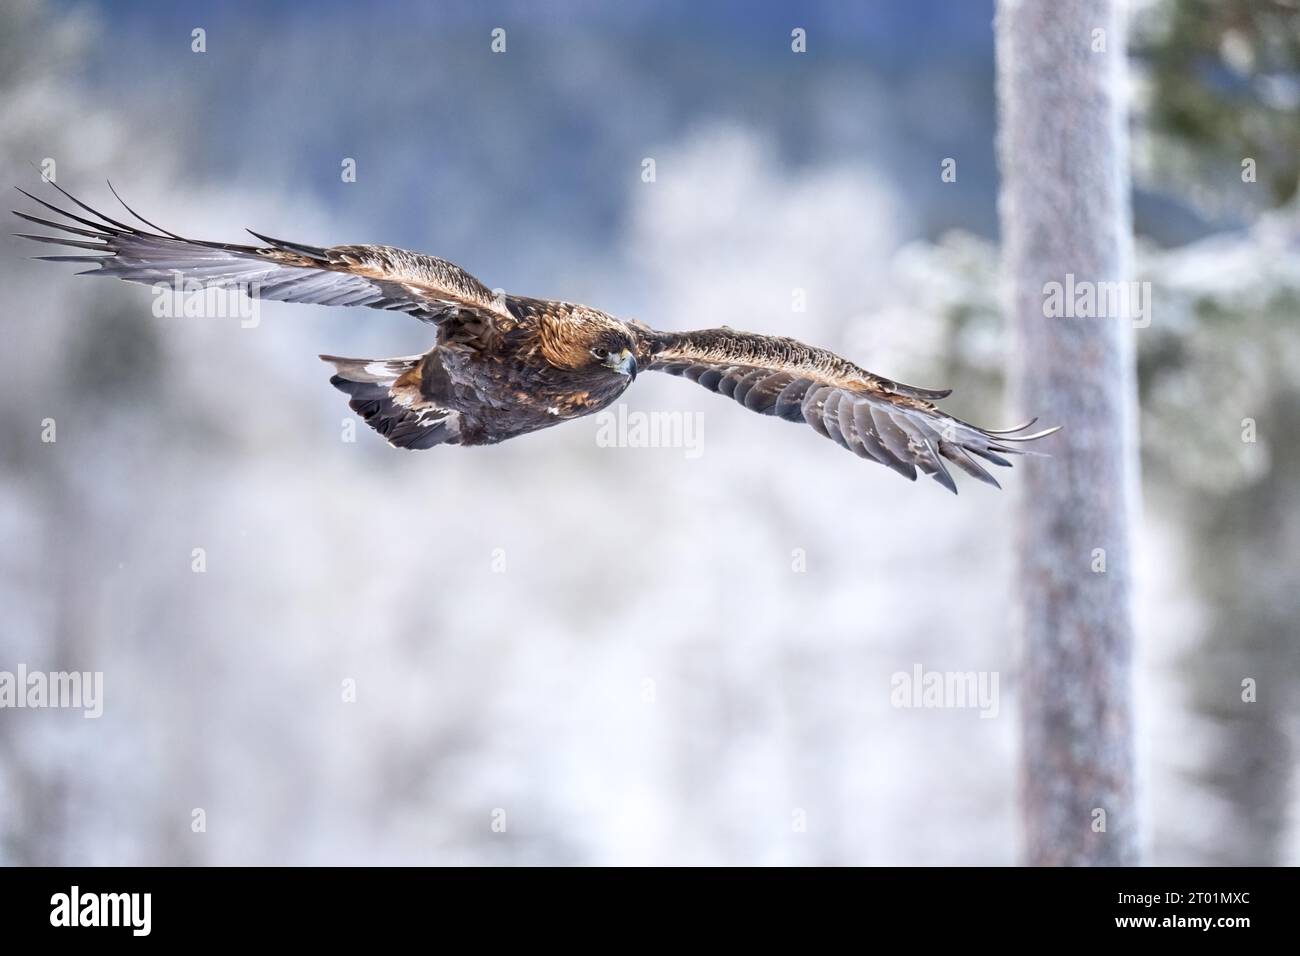 Golden eagle in its natural environment Stock Photo